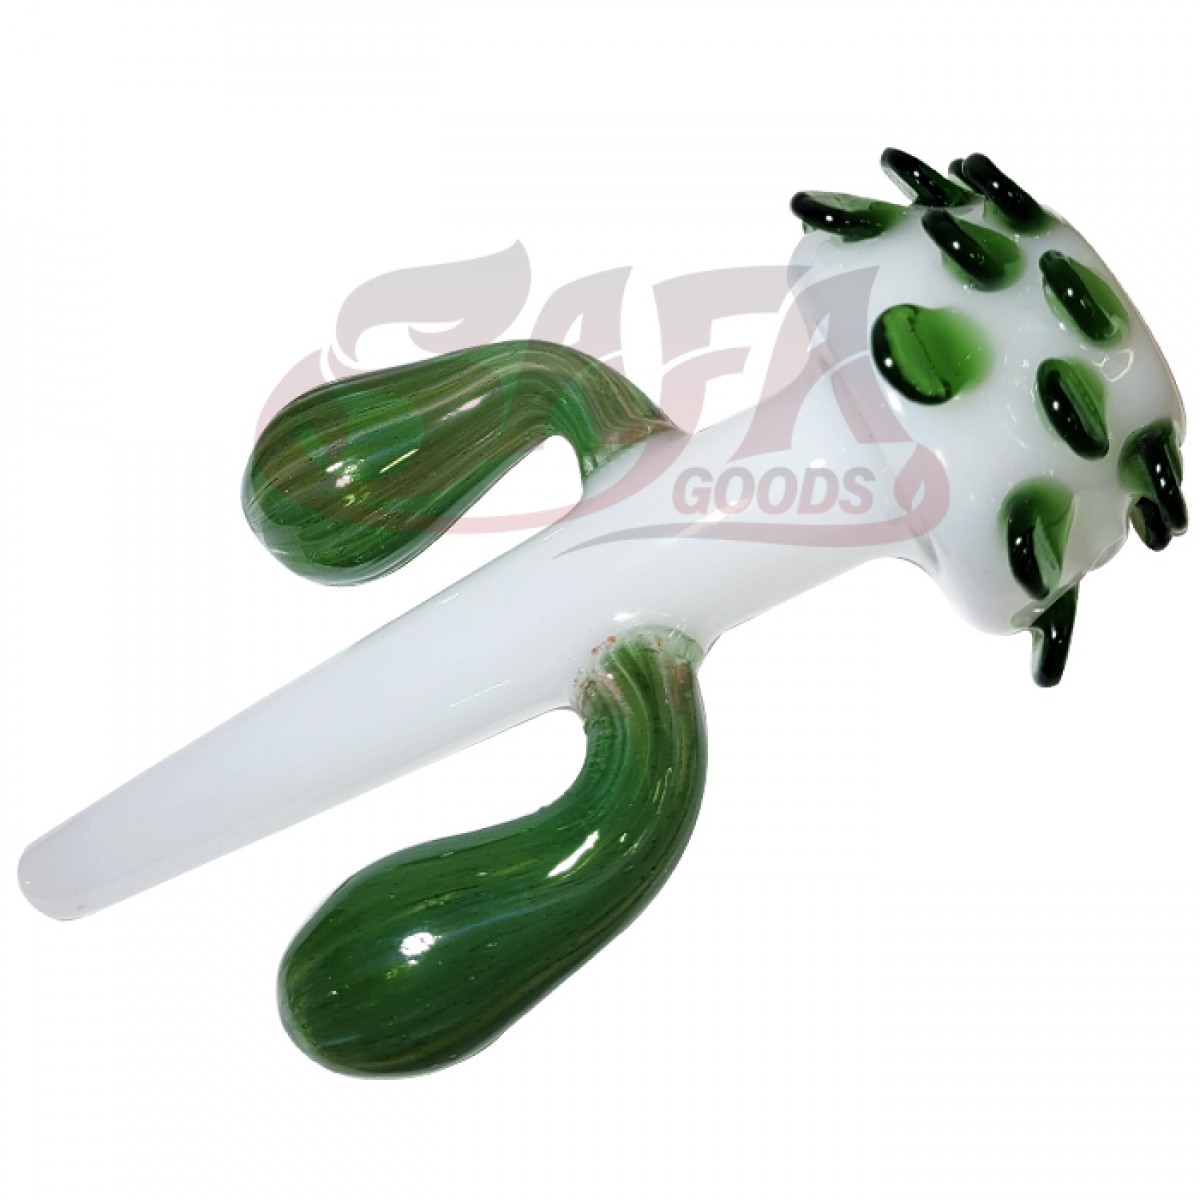 7" Cactus Themed Hand Pipe